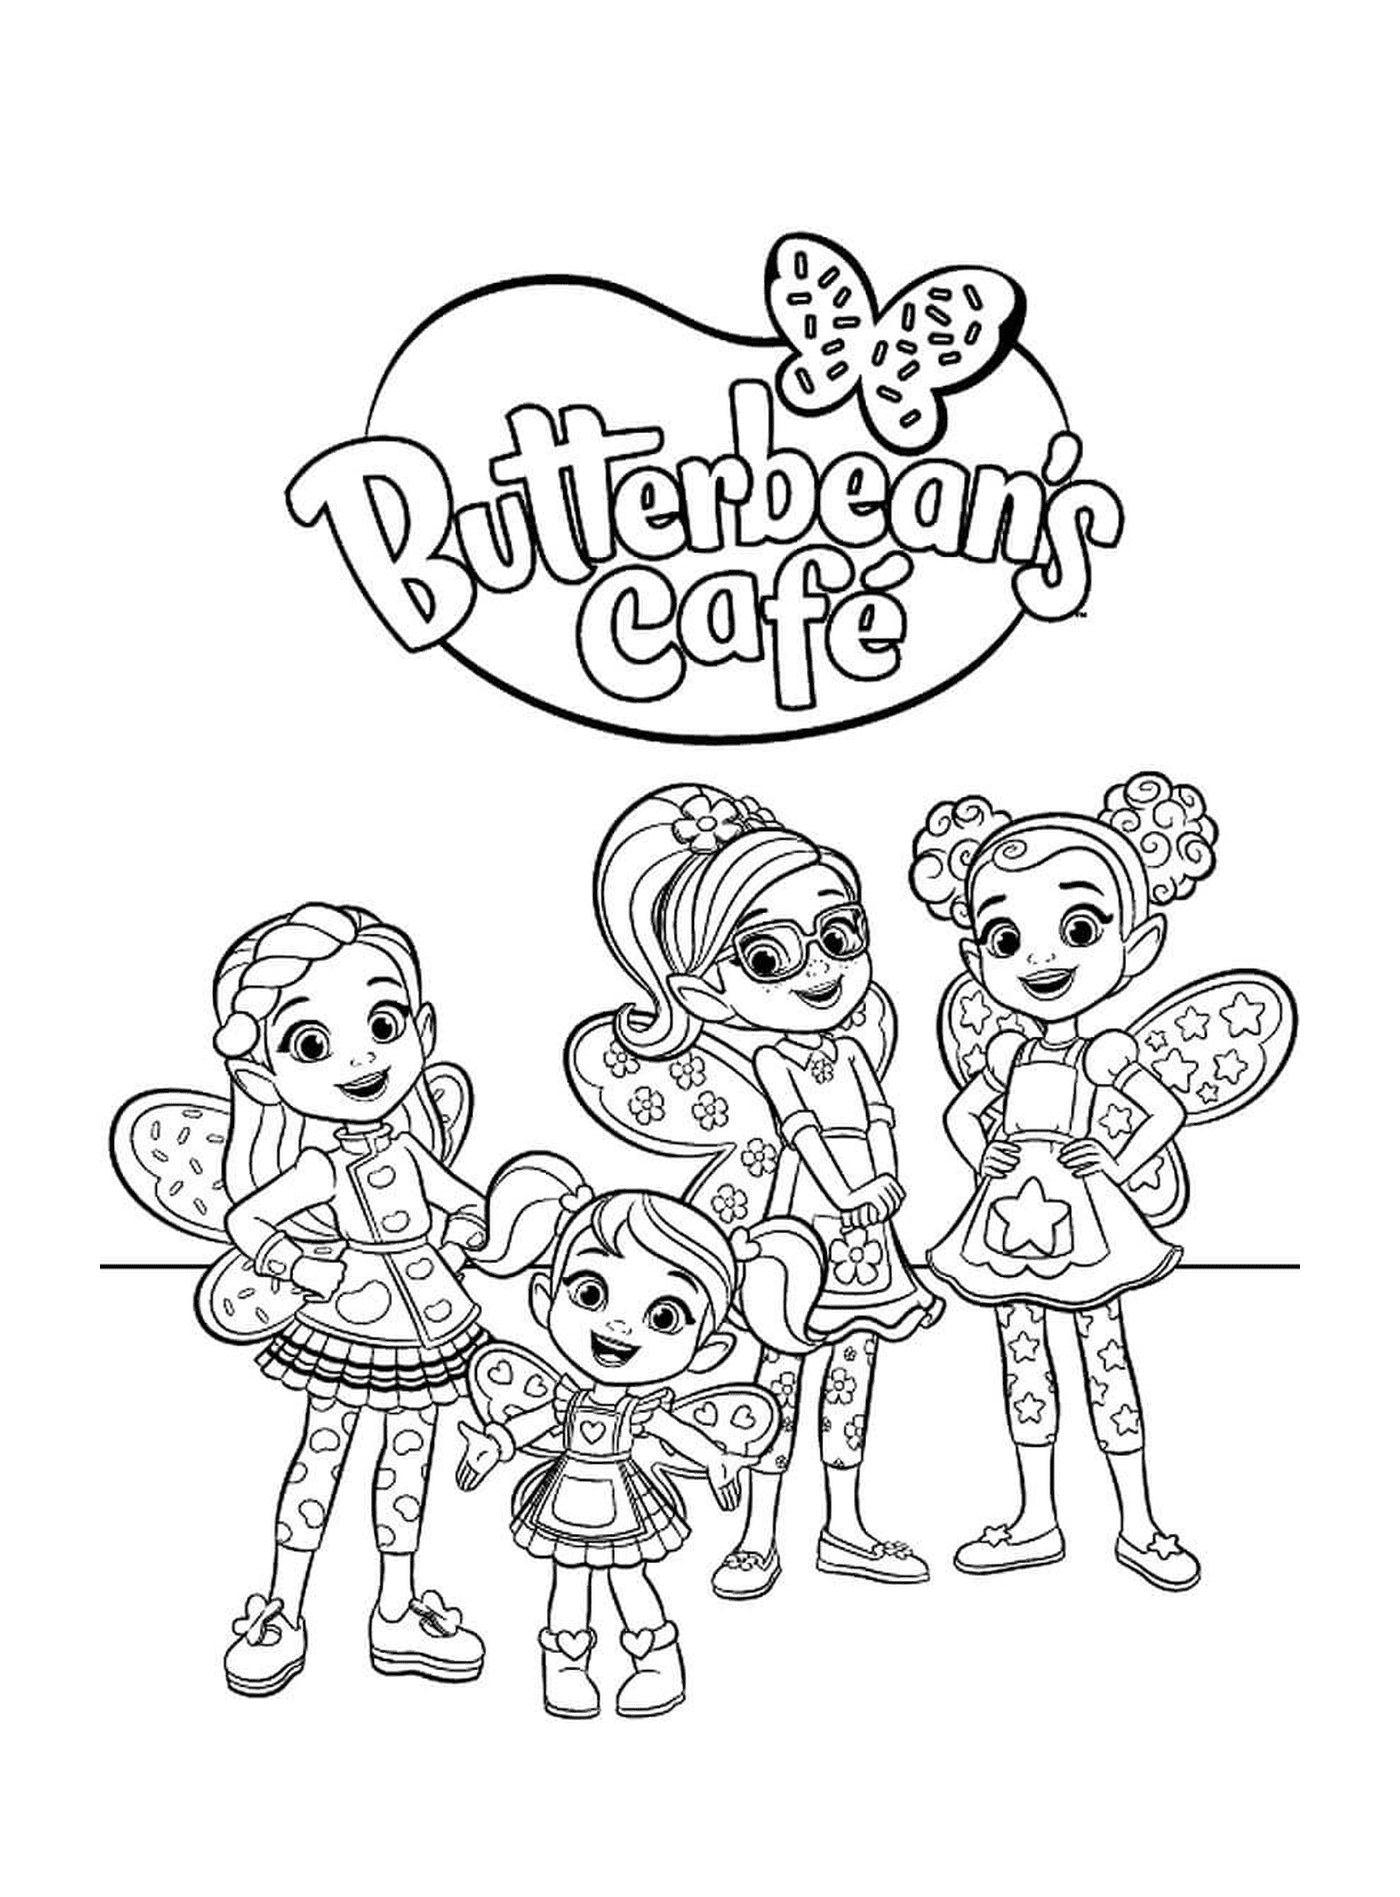  The big family of Butterbean Café disguised as fairies 